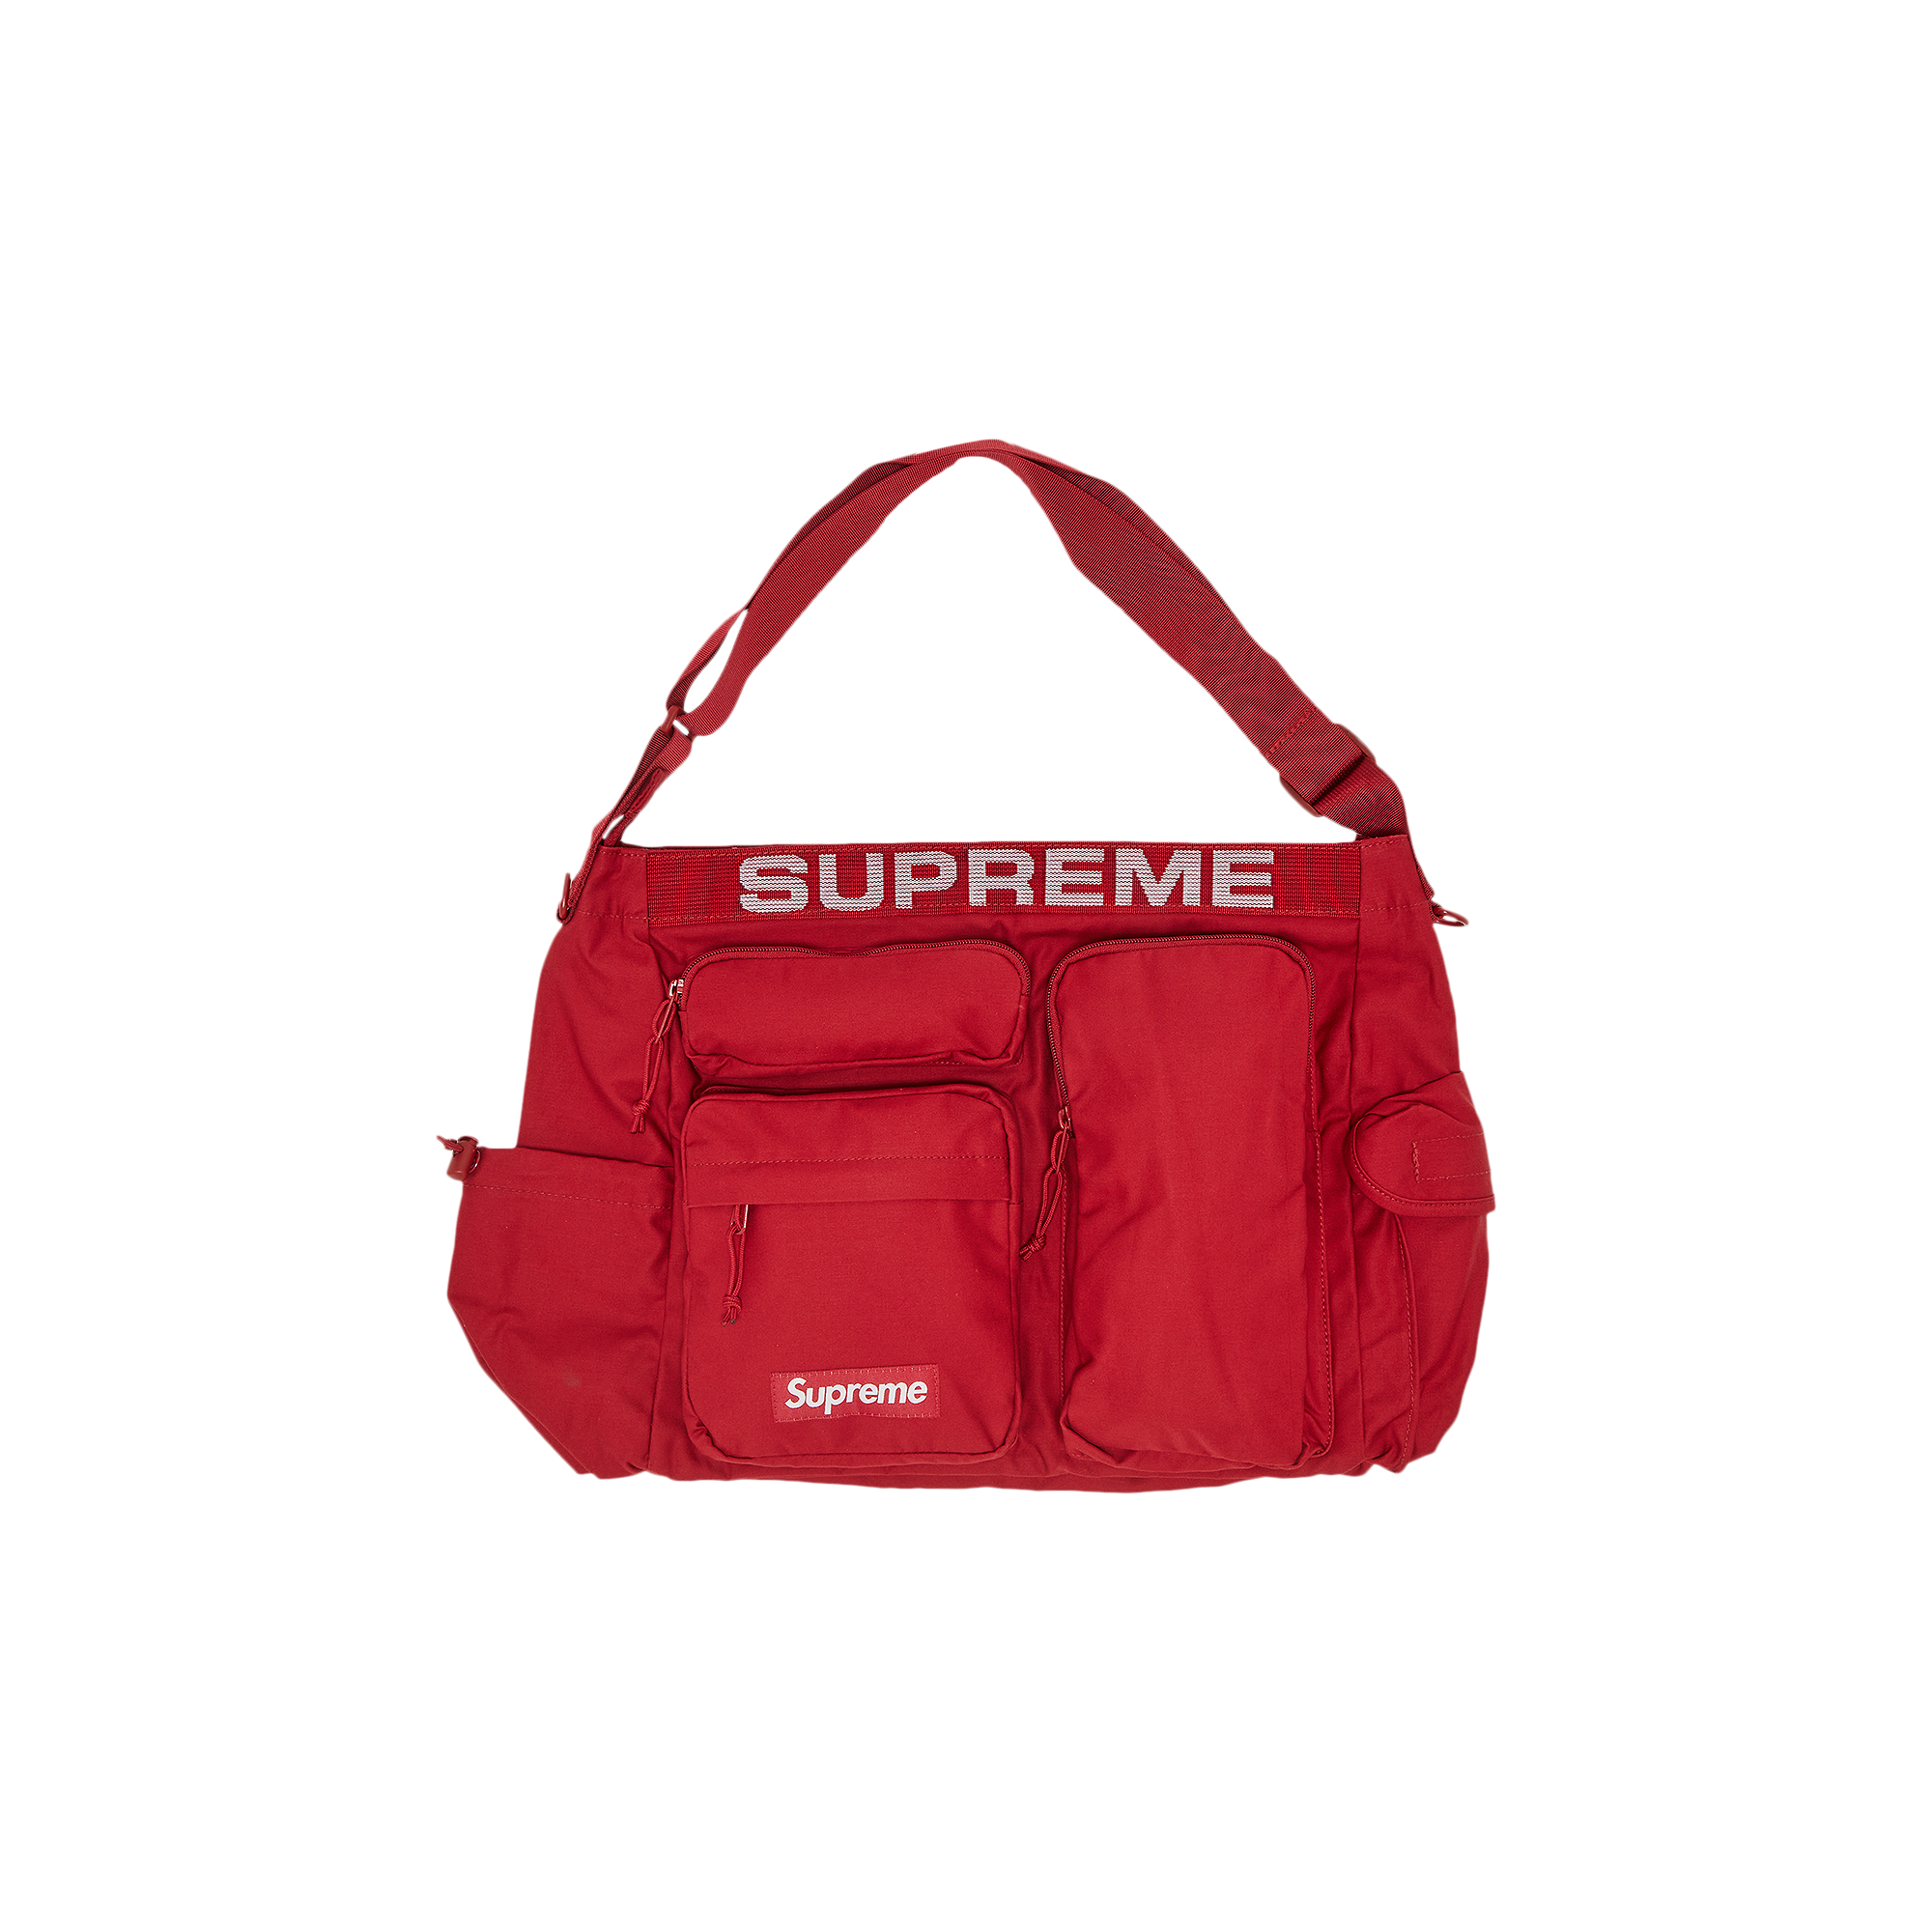 Shoulder bag supreme- You can buy products with good quality on AliExpress